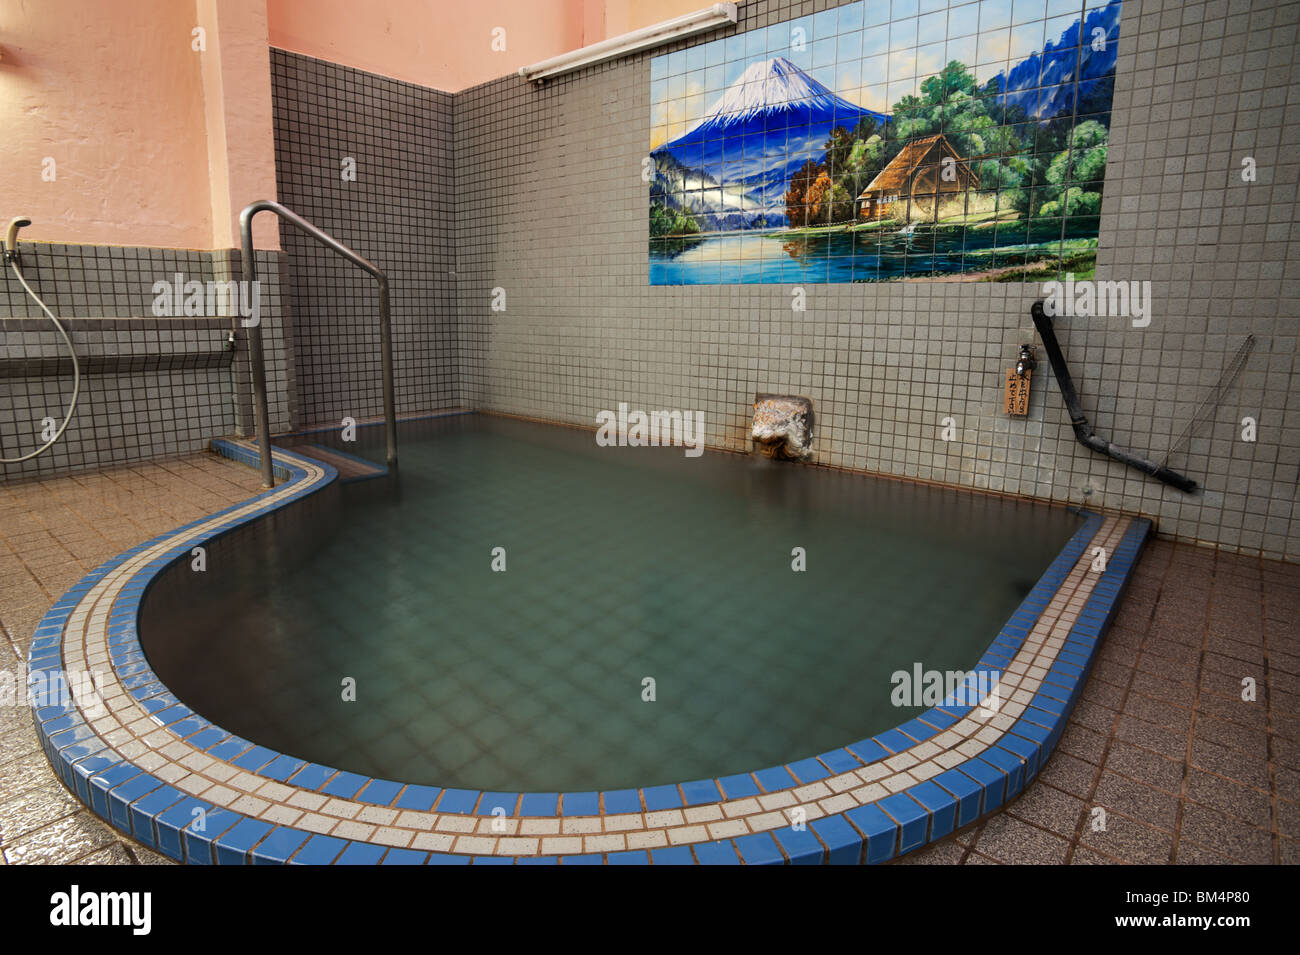 A public bath-house, or sento, filled with naturally heated hot-springs water in Nagano, Japan Stock Photo